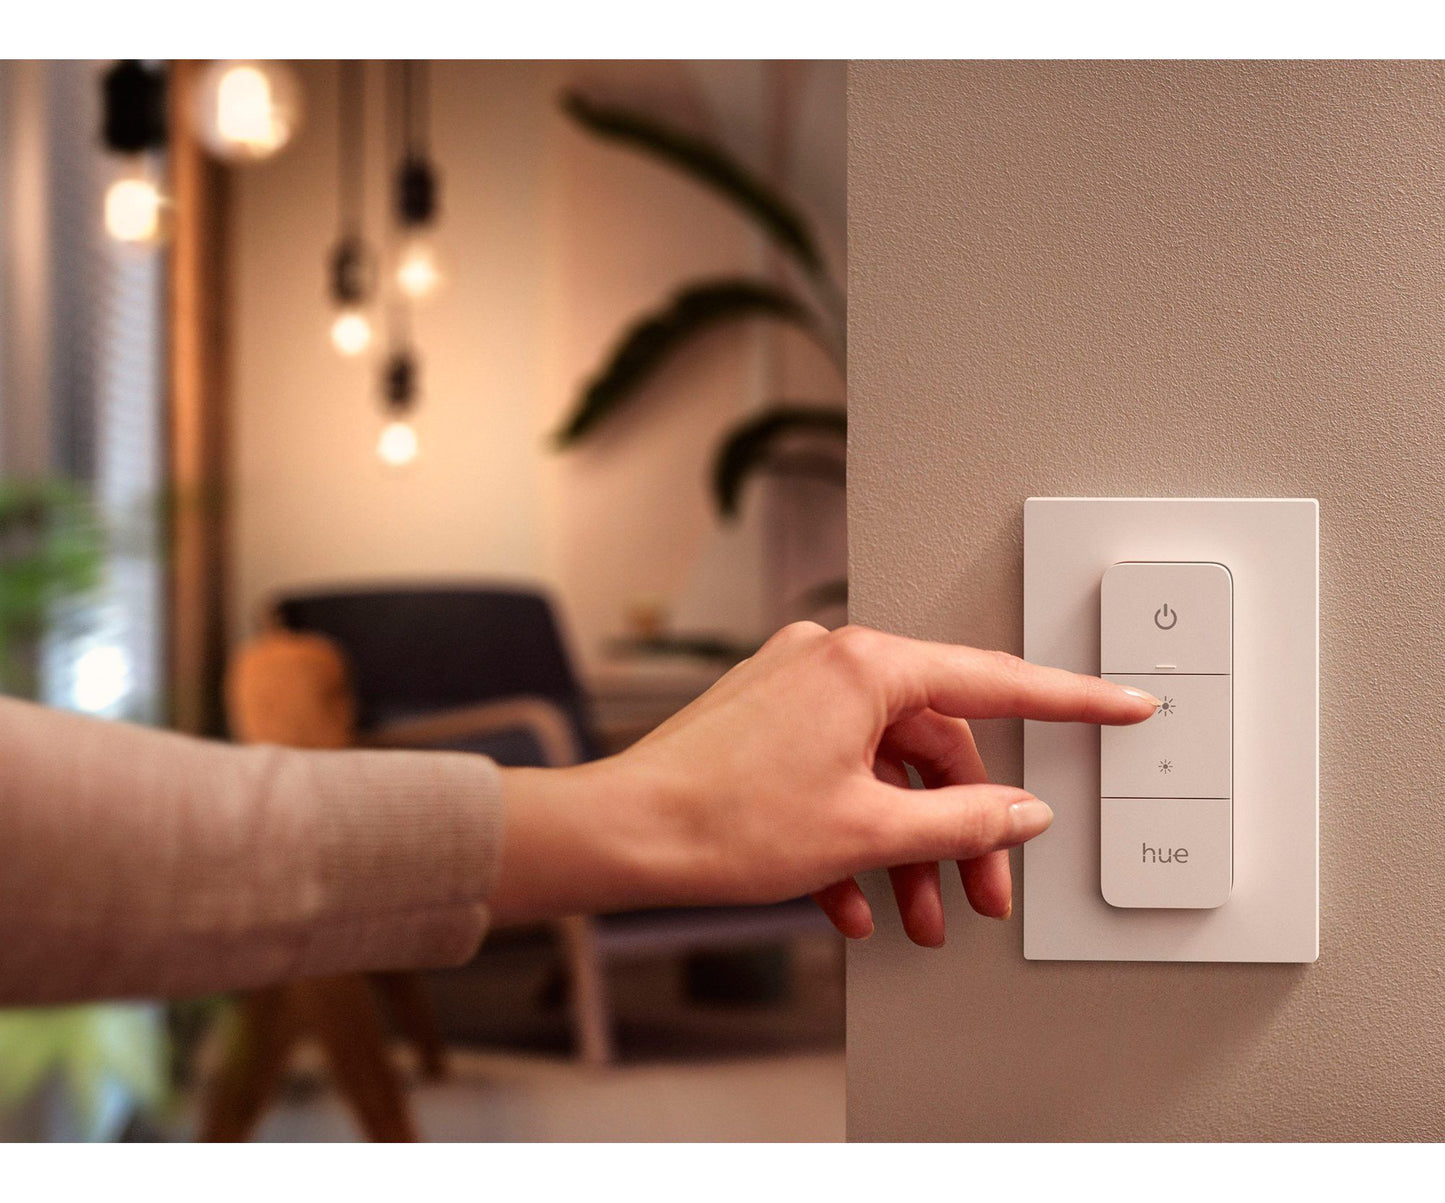 Philips Hue - Hue Switch Remote Dimmer